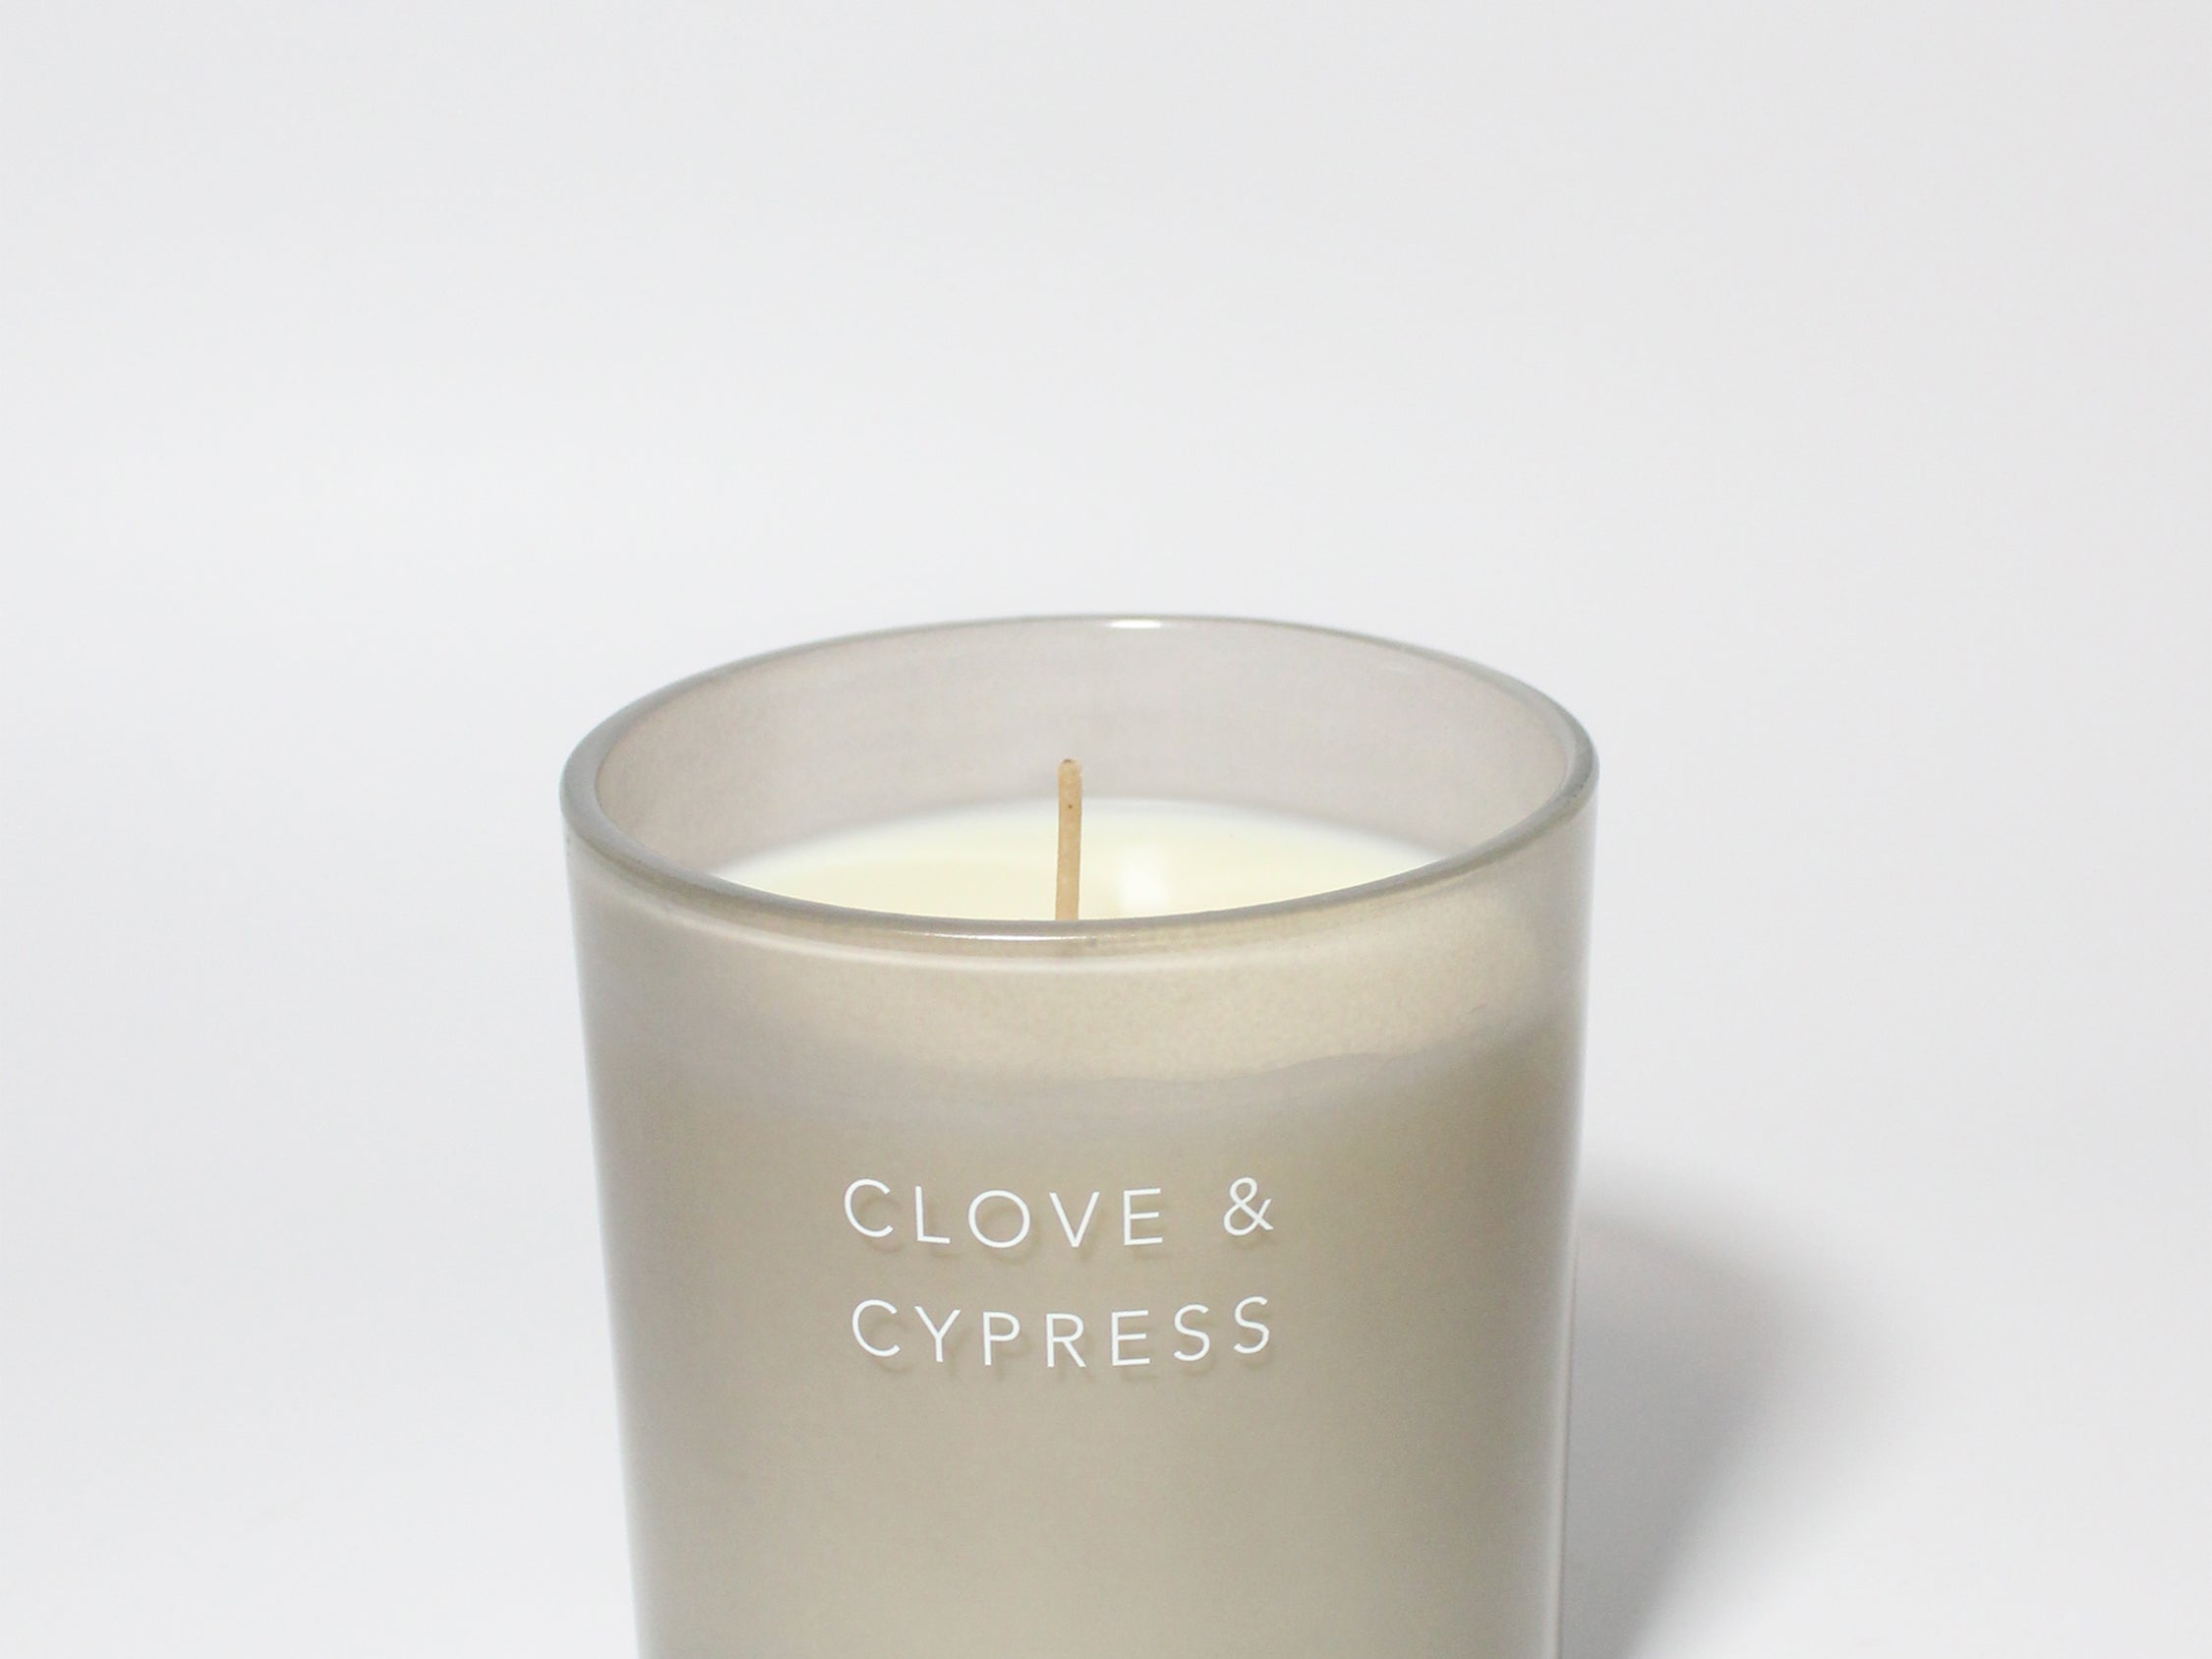 Clove & Cypress 12 oz scented candle Gray Vessel with black metal lid